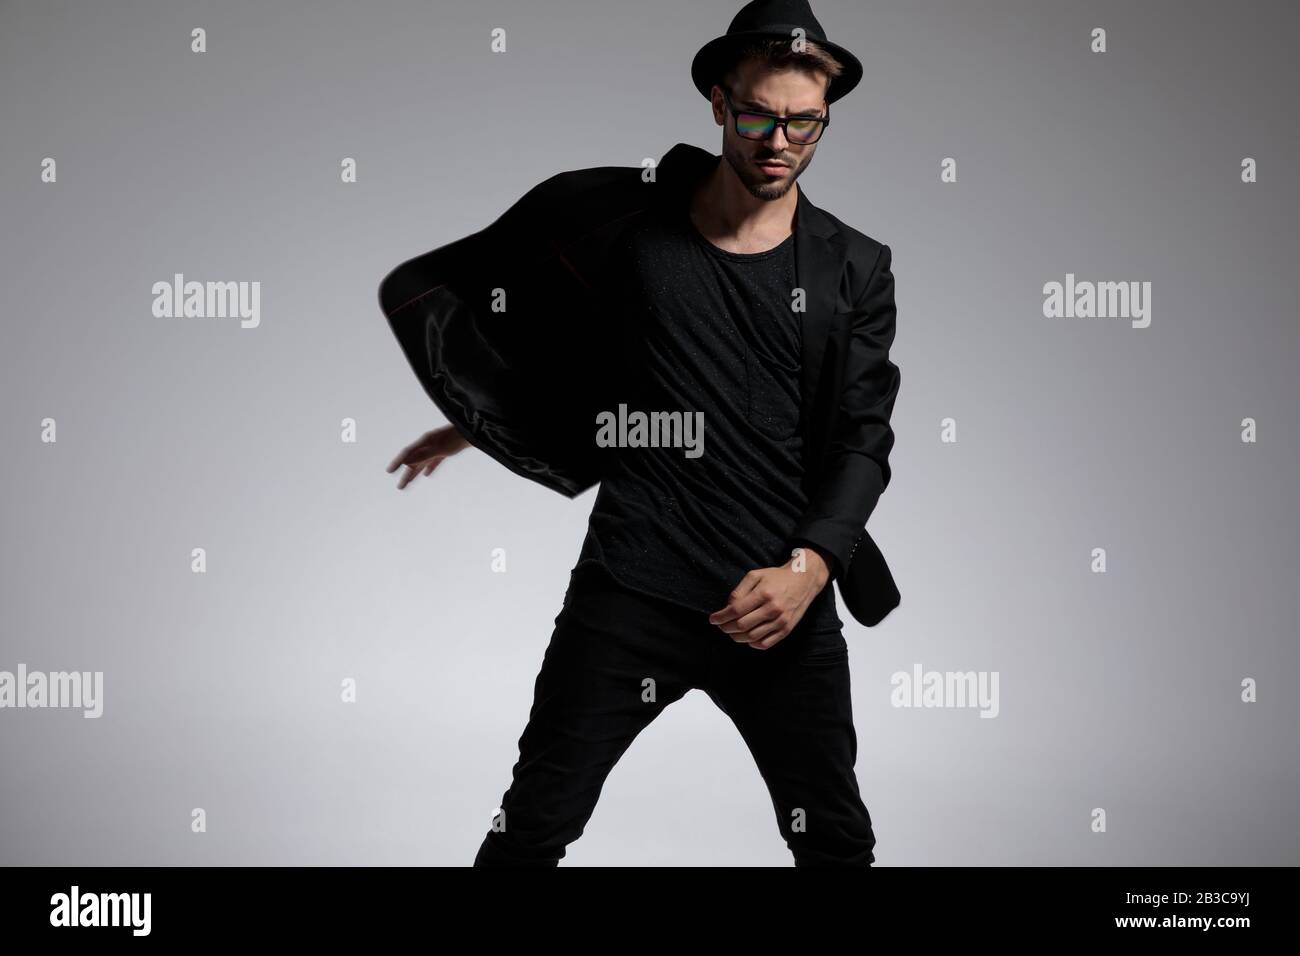 good looking casual man wearing a hat and glasses spinning with a powerful attitude against gray studio background Stock Photo